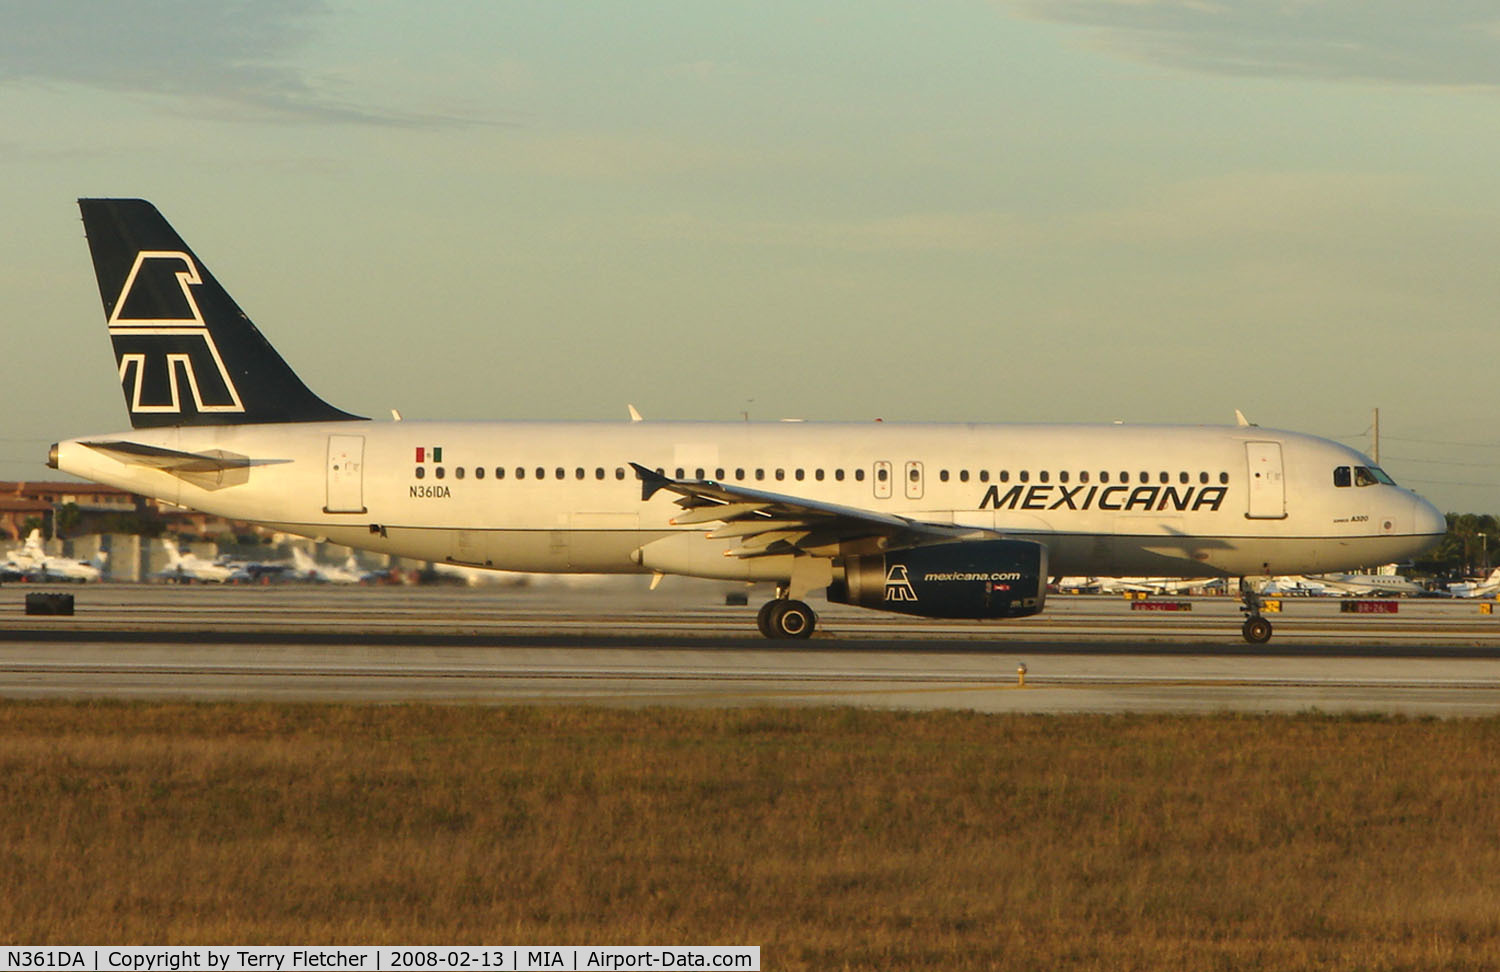 N361DA, 1992 Airbus A320-231 C/N 361, Mexicana A320 had previously operated in Turkey and Holland - seen here at Miami in Feb 2008